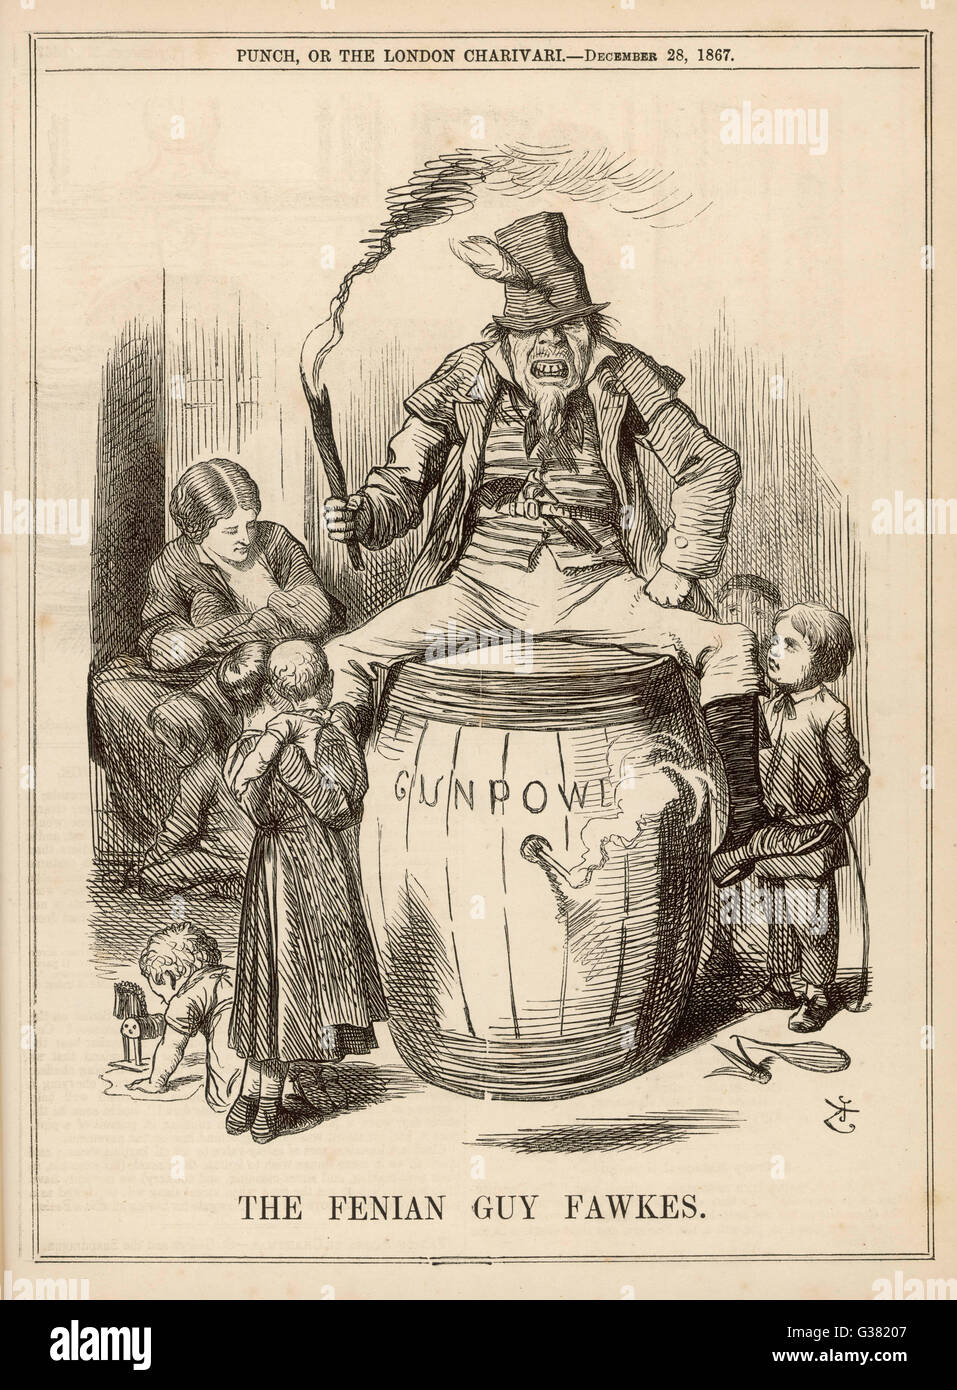 FENIAN GUY FAWKES 1867 Banque D'Images